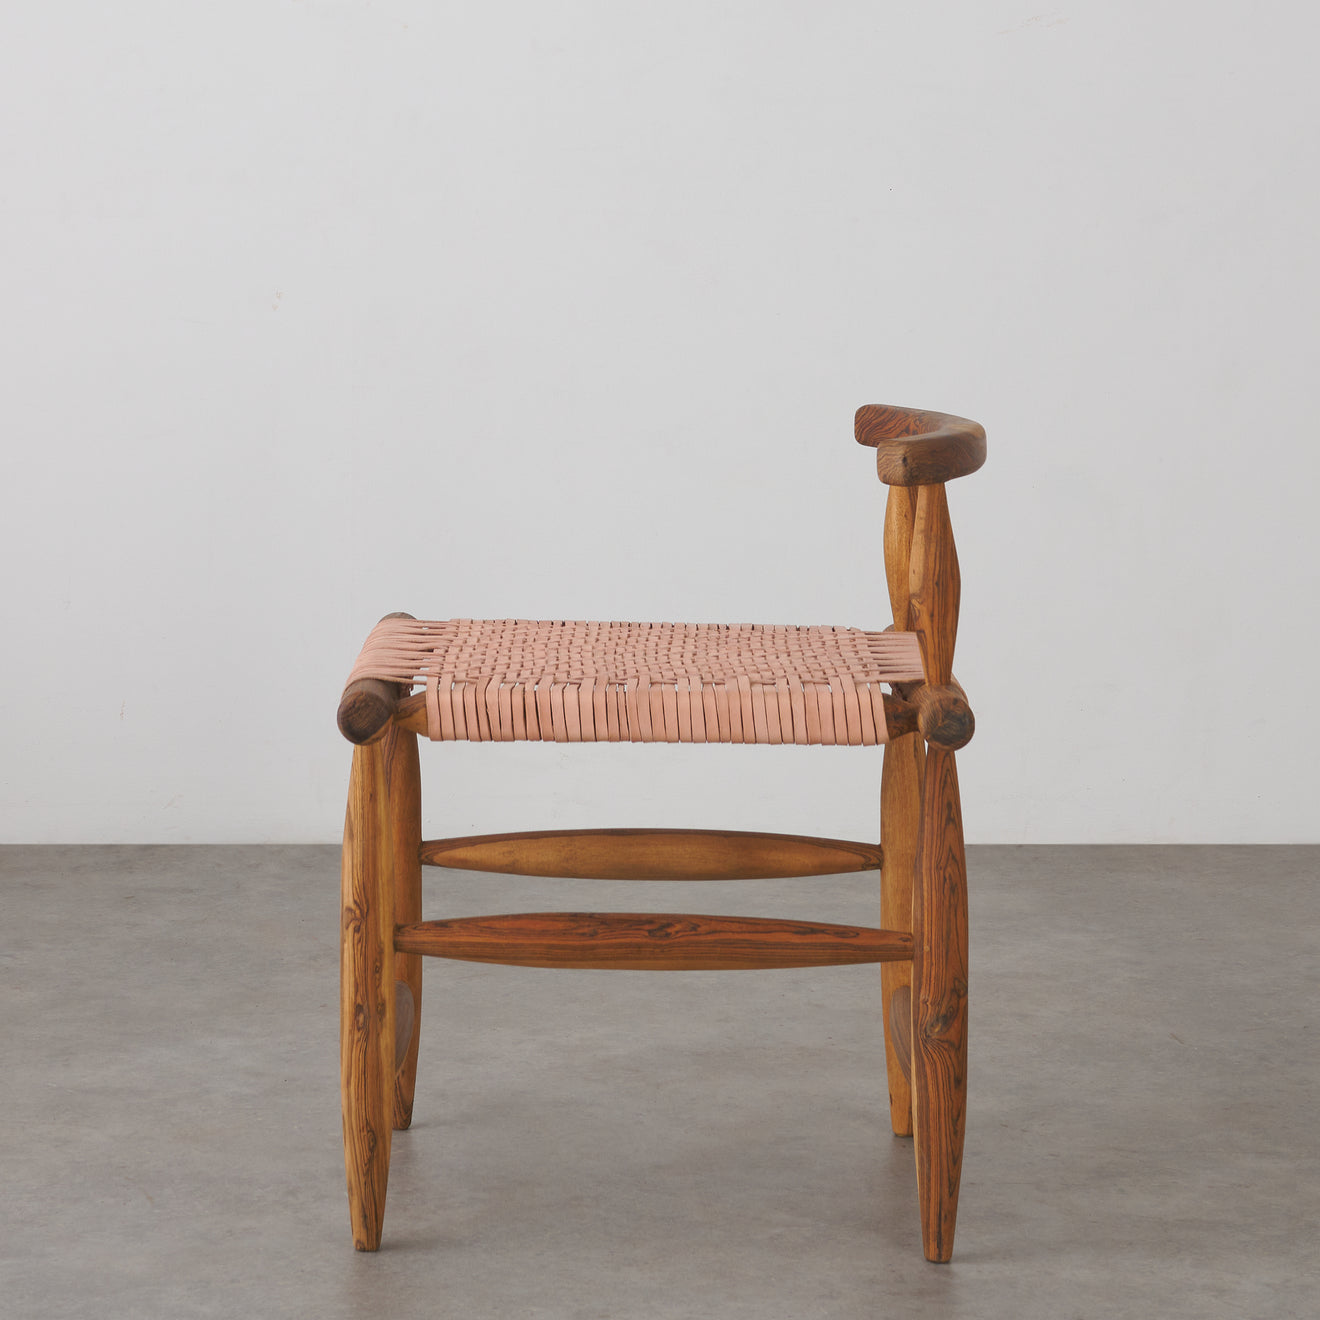 ORIENTALIST OCCASIONAL CHAIR IN BOCATE WOOD